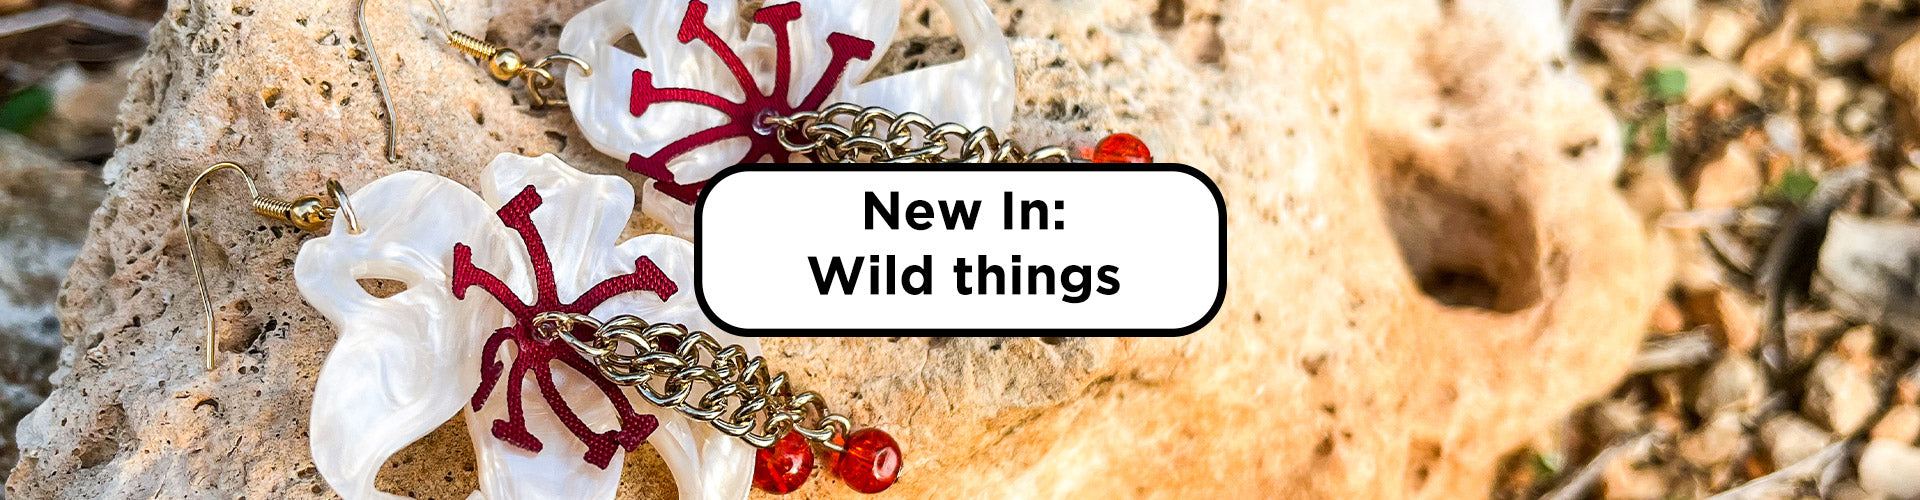 SS22: Wild Things